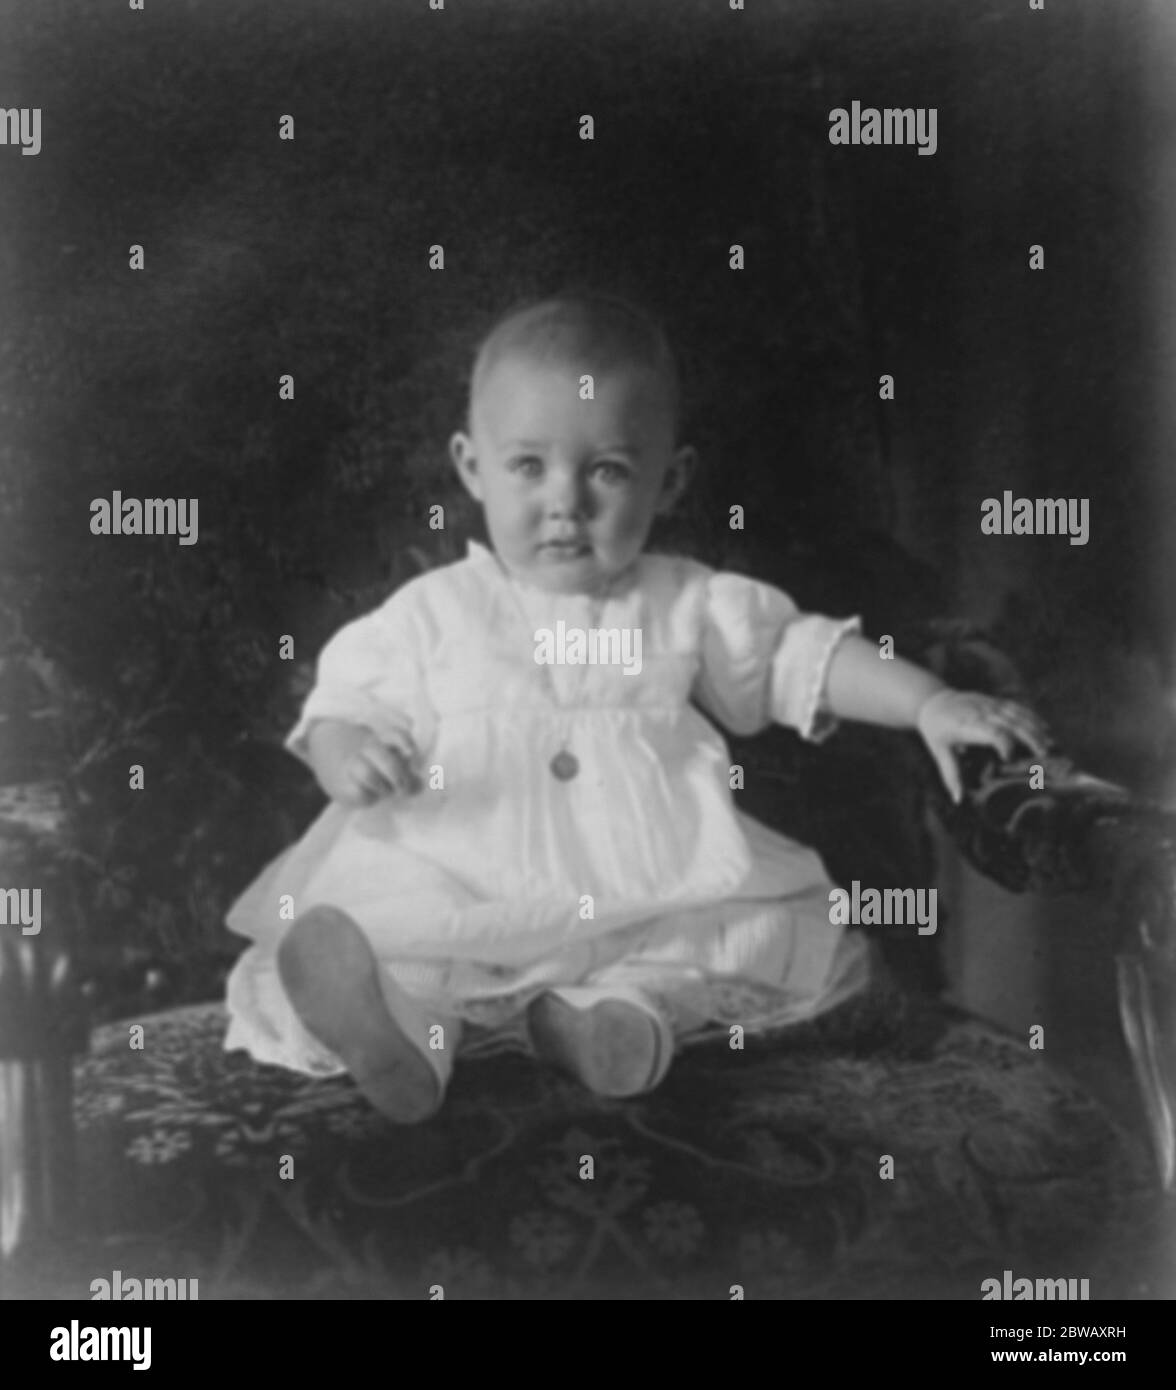 Little Heir to Europe 's Littlest Throne The hereditary Prince Jean of Luxemburg , the infant sonof the reigning Grand Duchess and her husband Prince Felix of Bourbon Parma . This is the baby 's first potrait 19 January 1923 Stock Photo